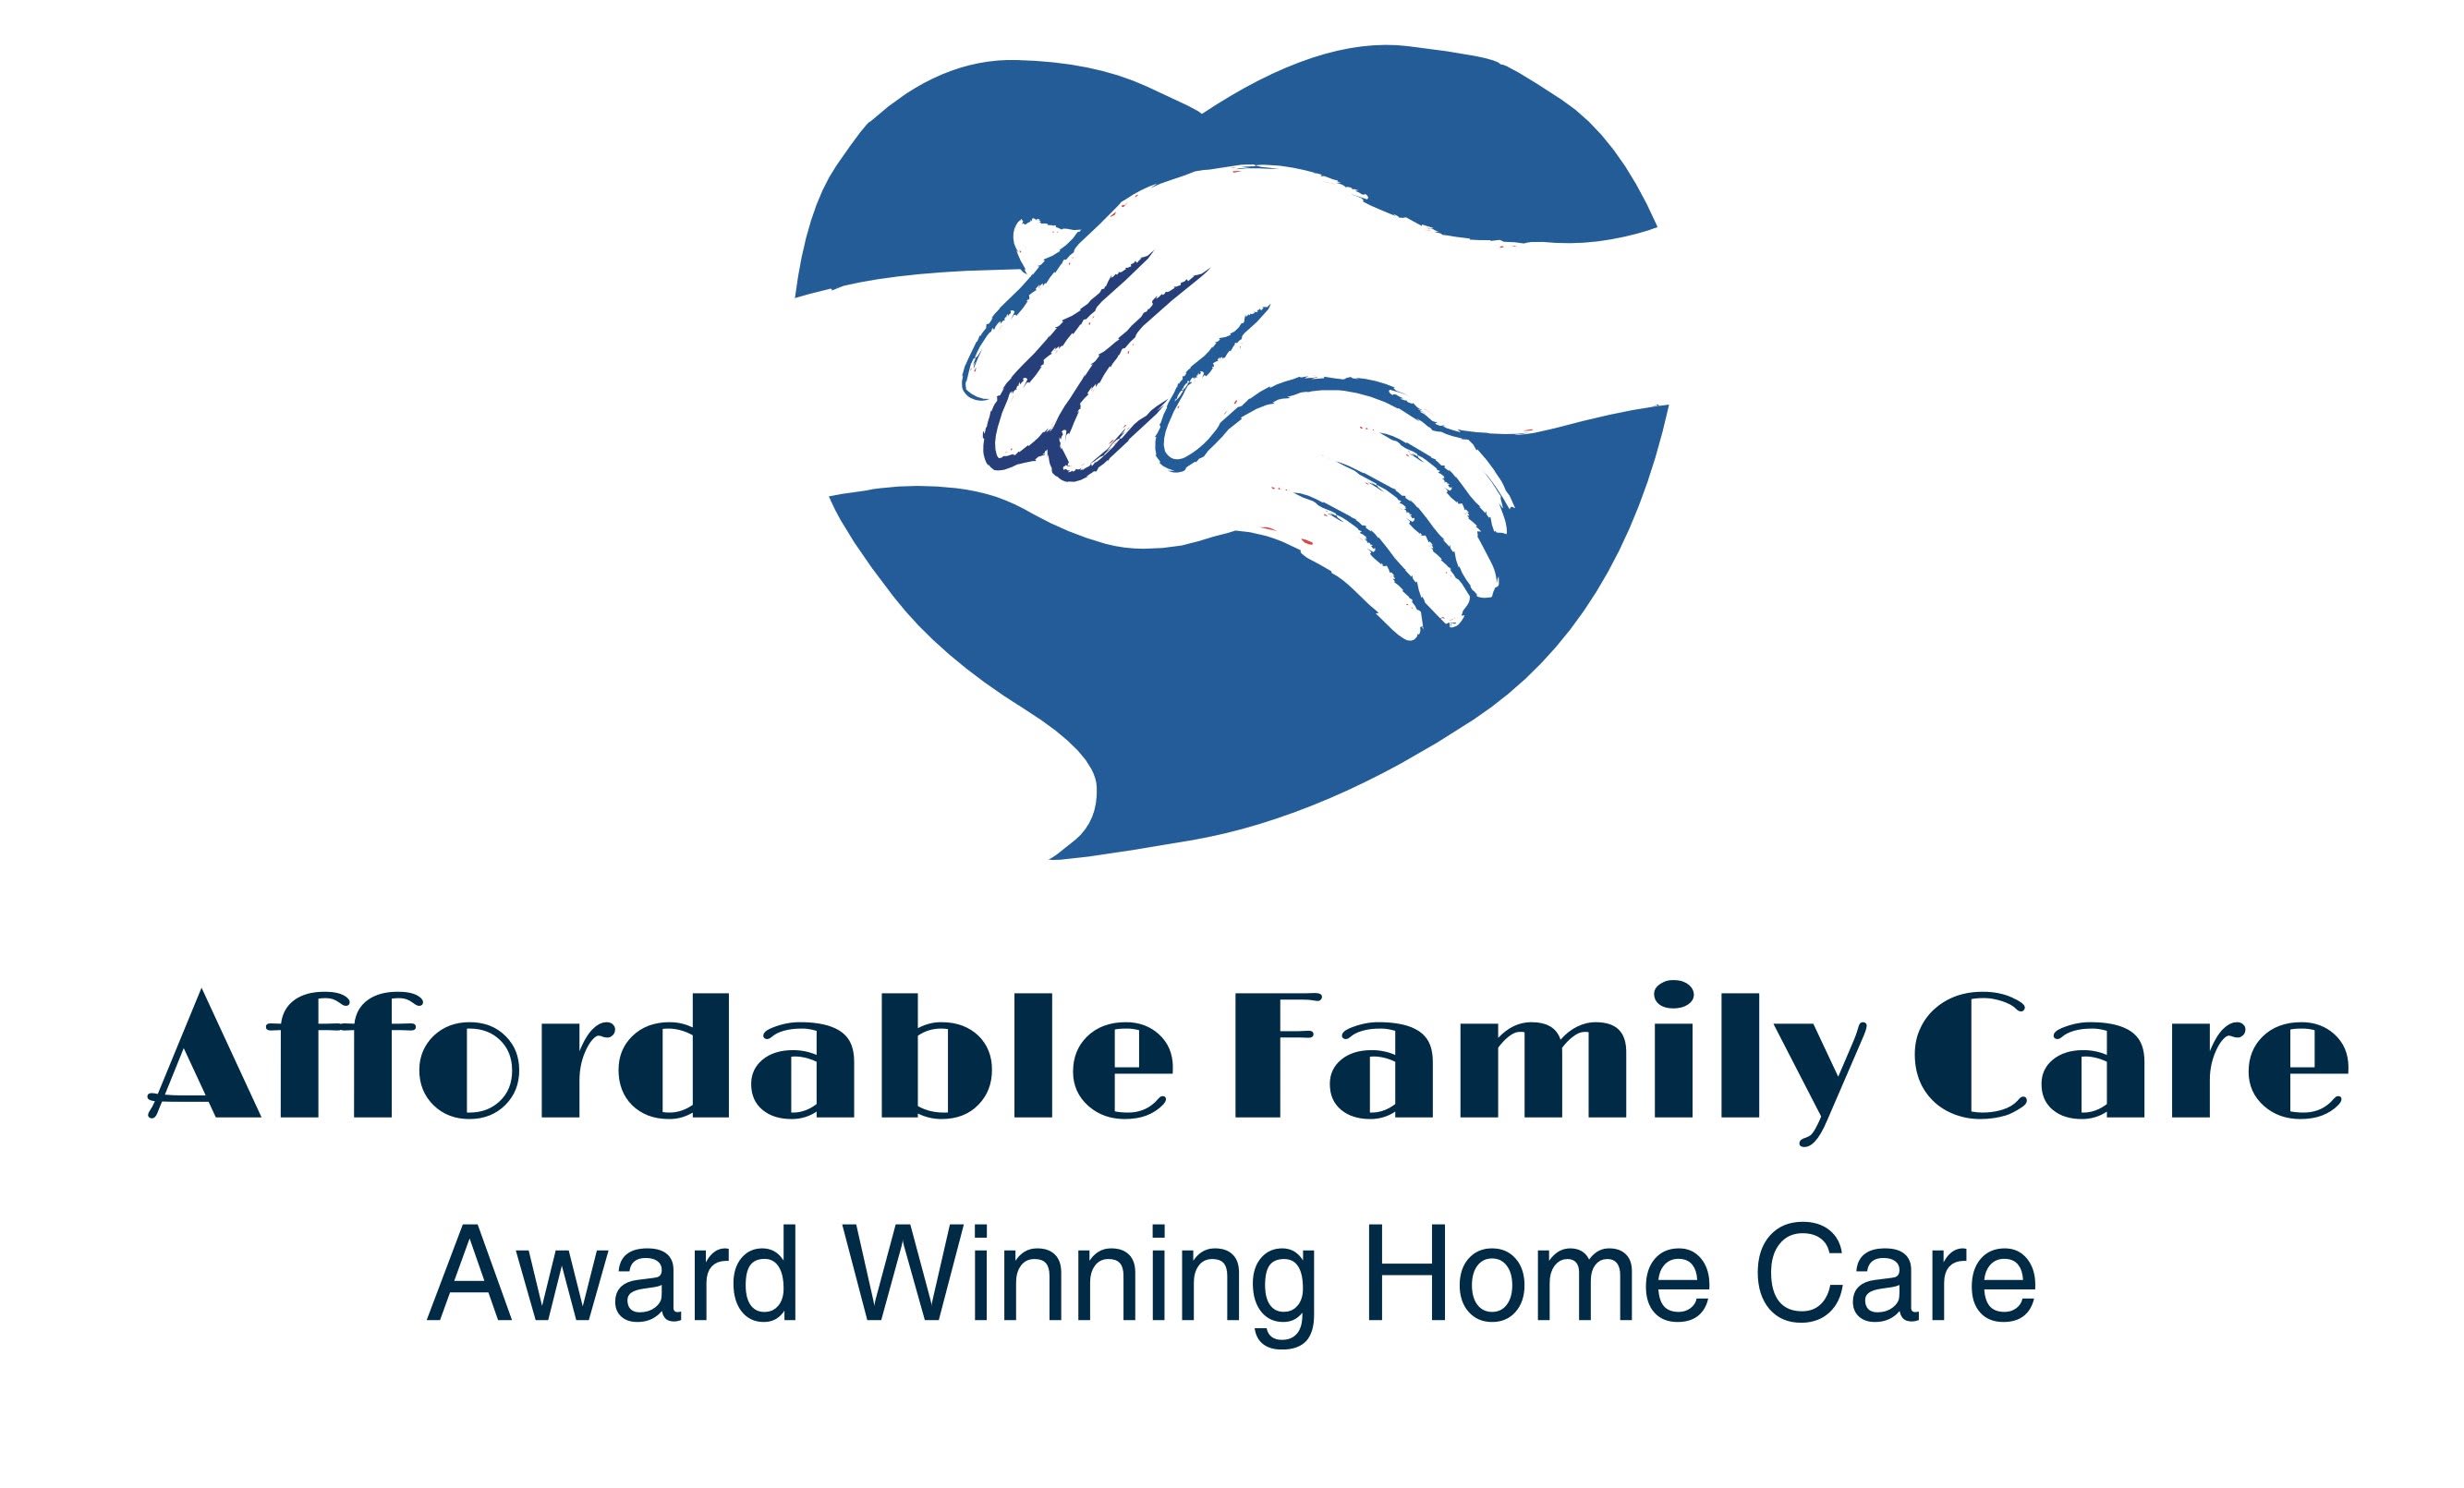 Affordable Family Care Services, Inc. - Greensboro, NC 